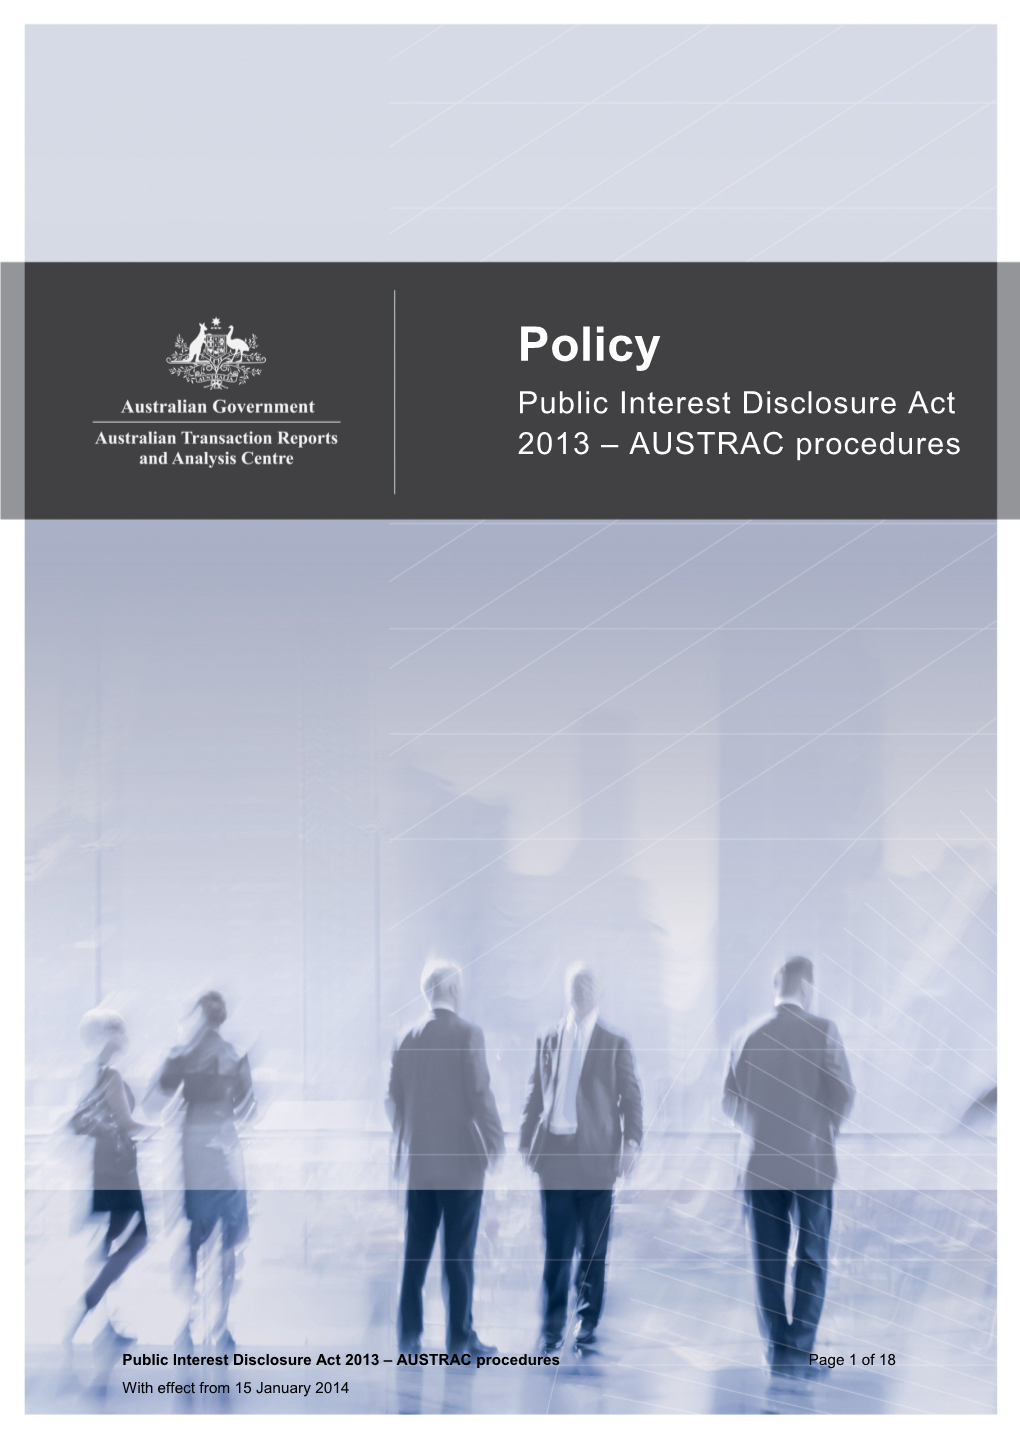 1.1.AUSTRAC Encourages the Making of Reports of Disclosable Conduct